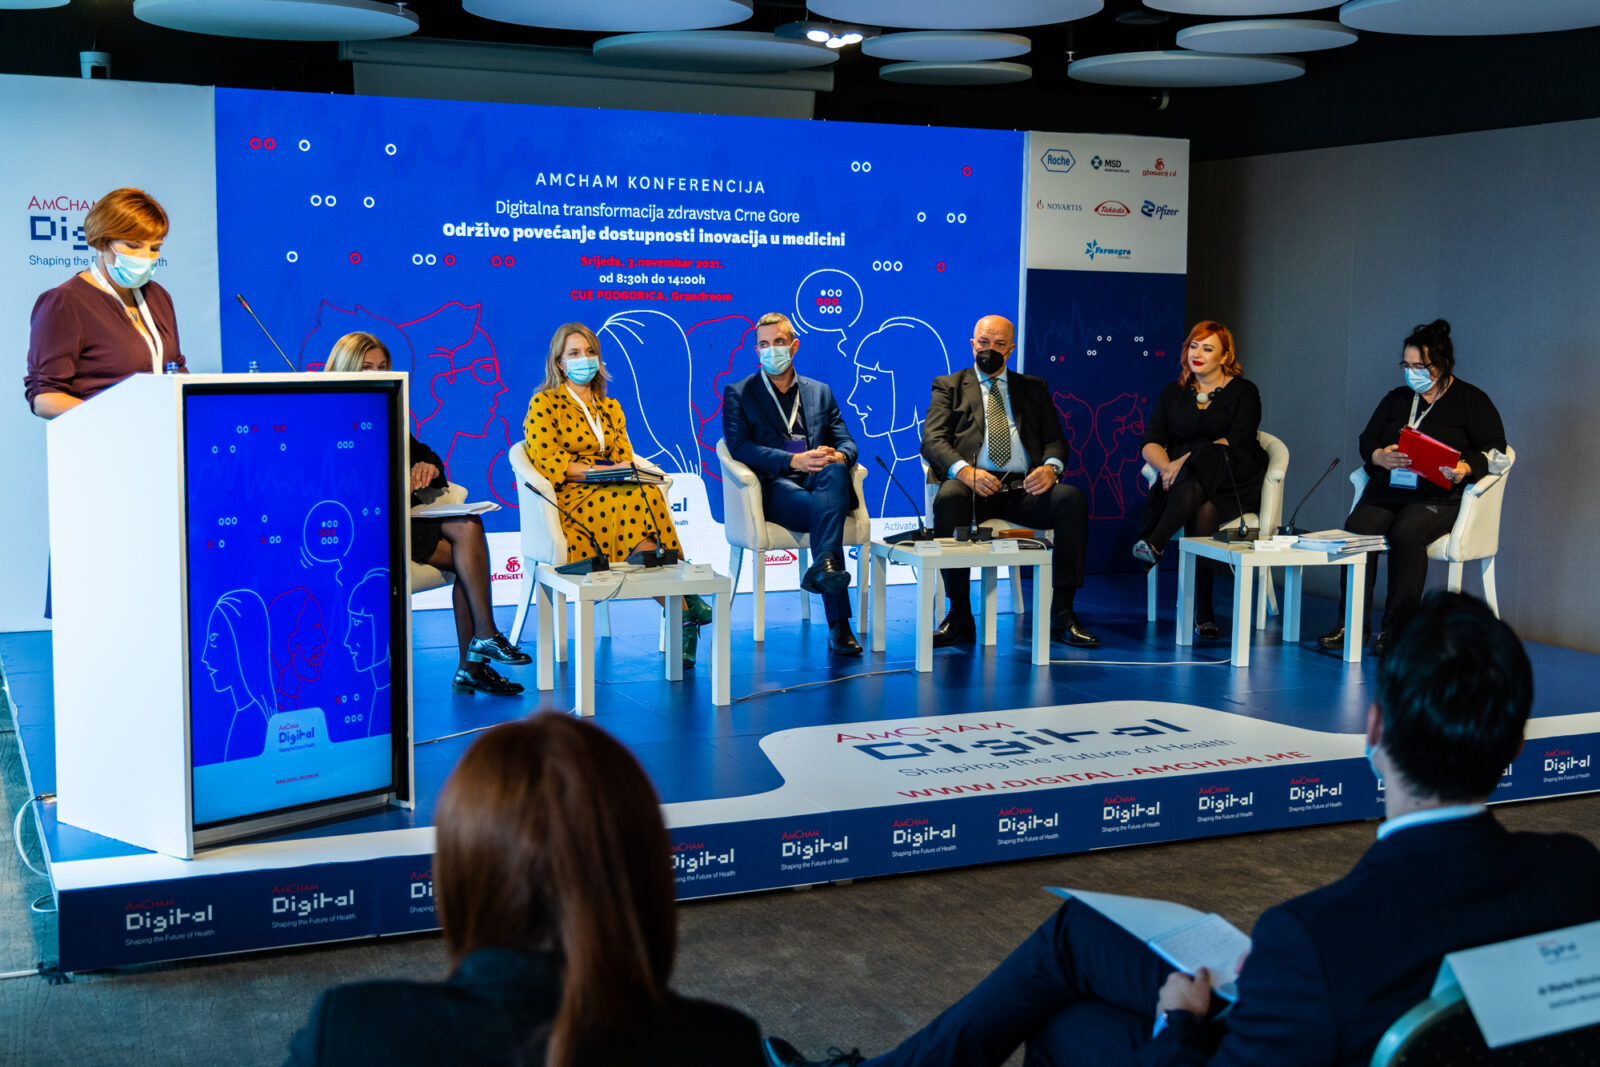 Digital Transformation of Healthcare in Montenegro – Sustainable Increasing Access to Innovation in Medicine, Nov 3, 2021